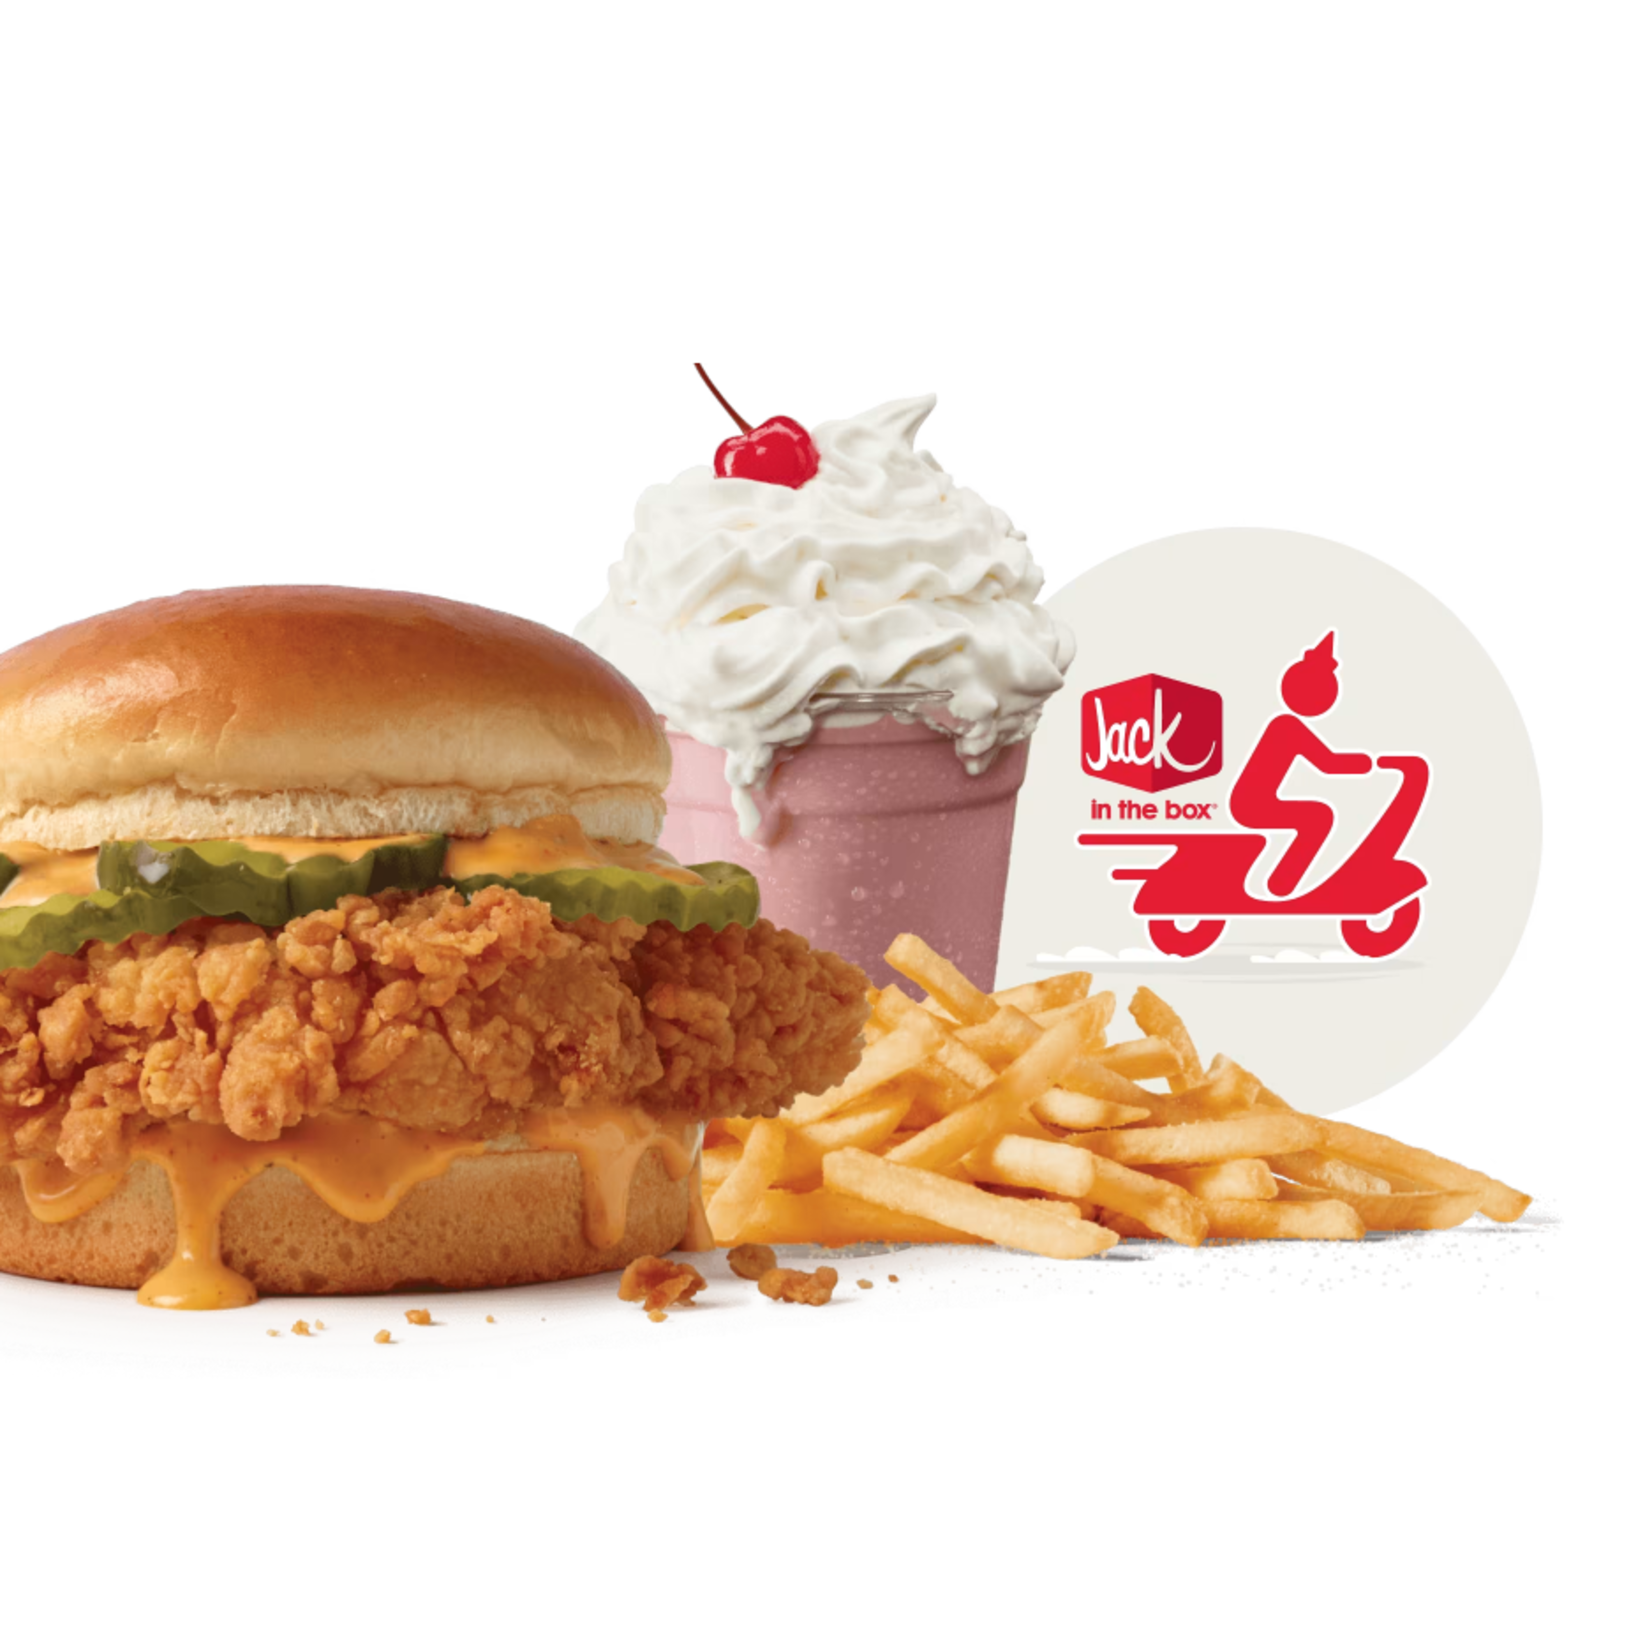 Jack in the Box Jack in the Box - St George UT $14 - Ultimate Cheeseburger Combo